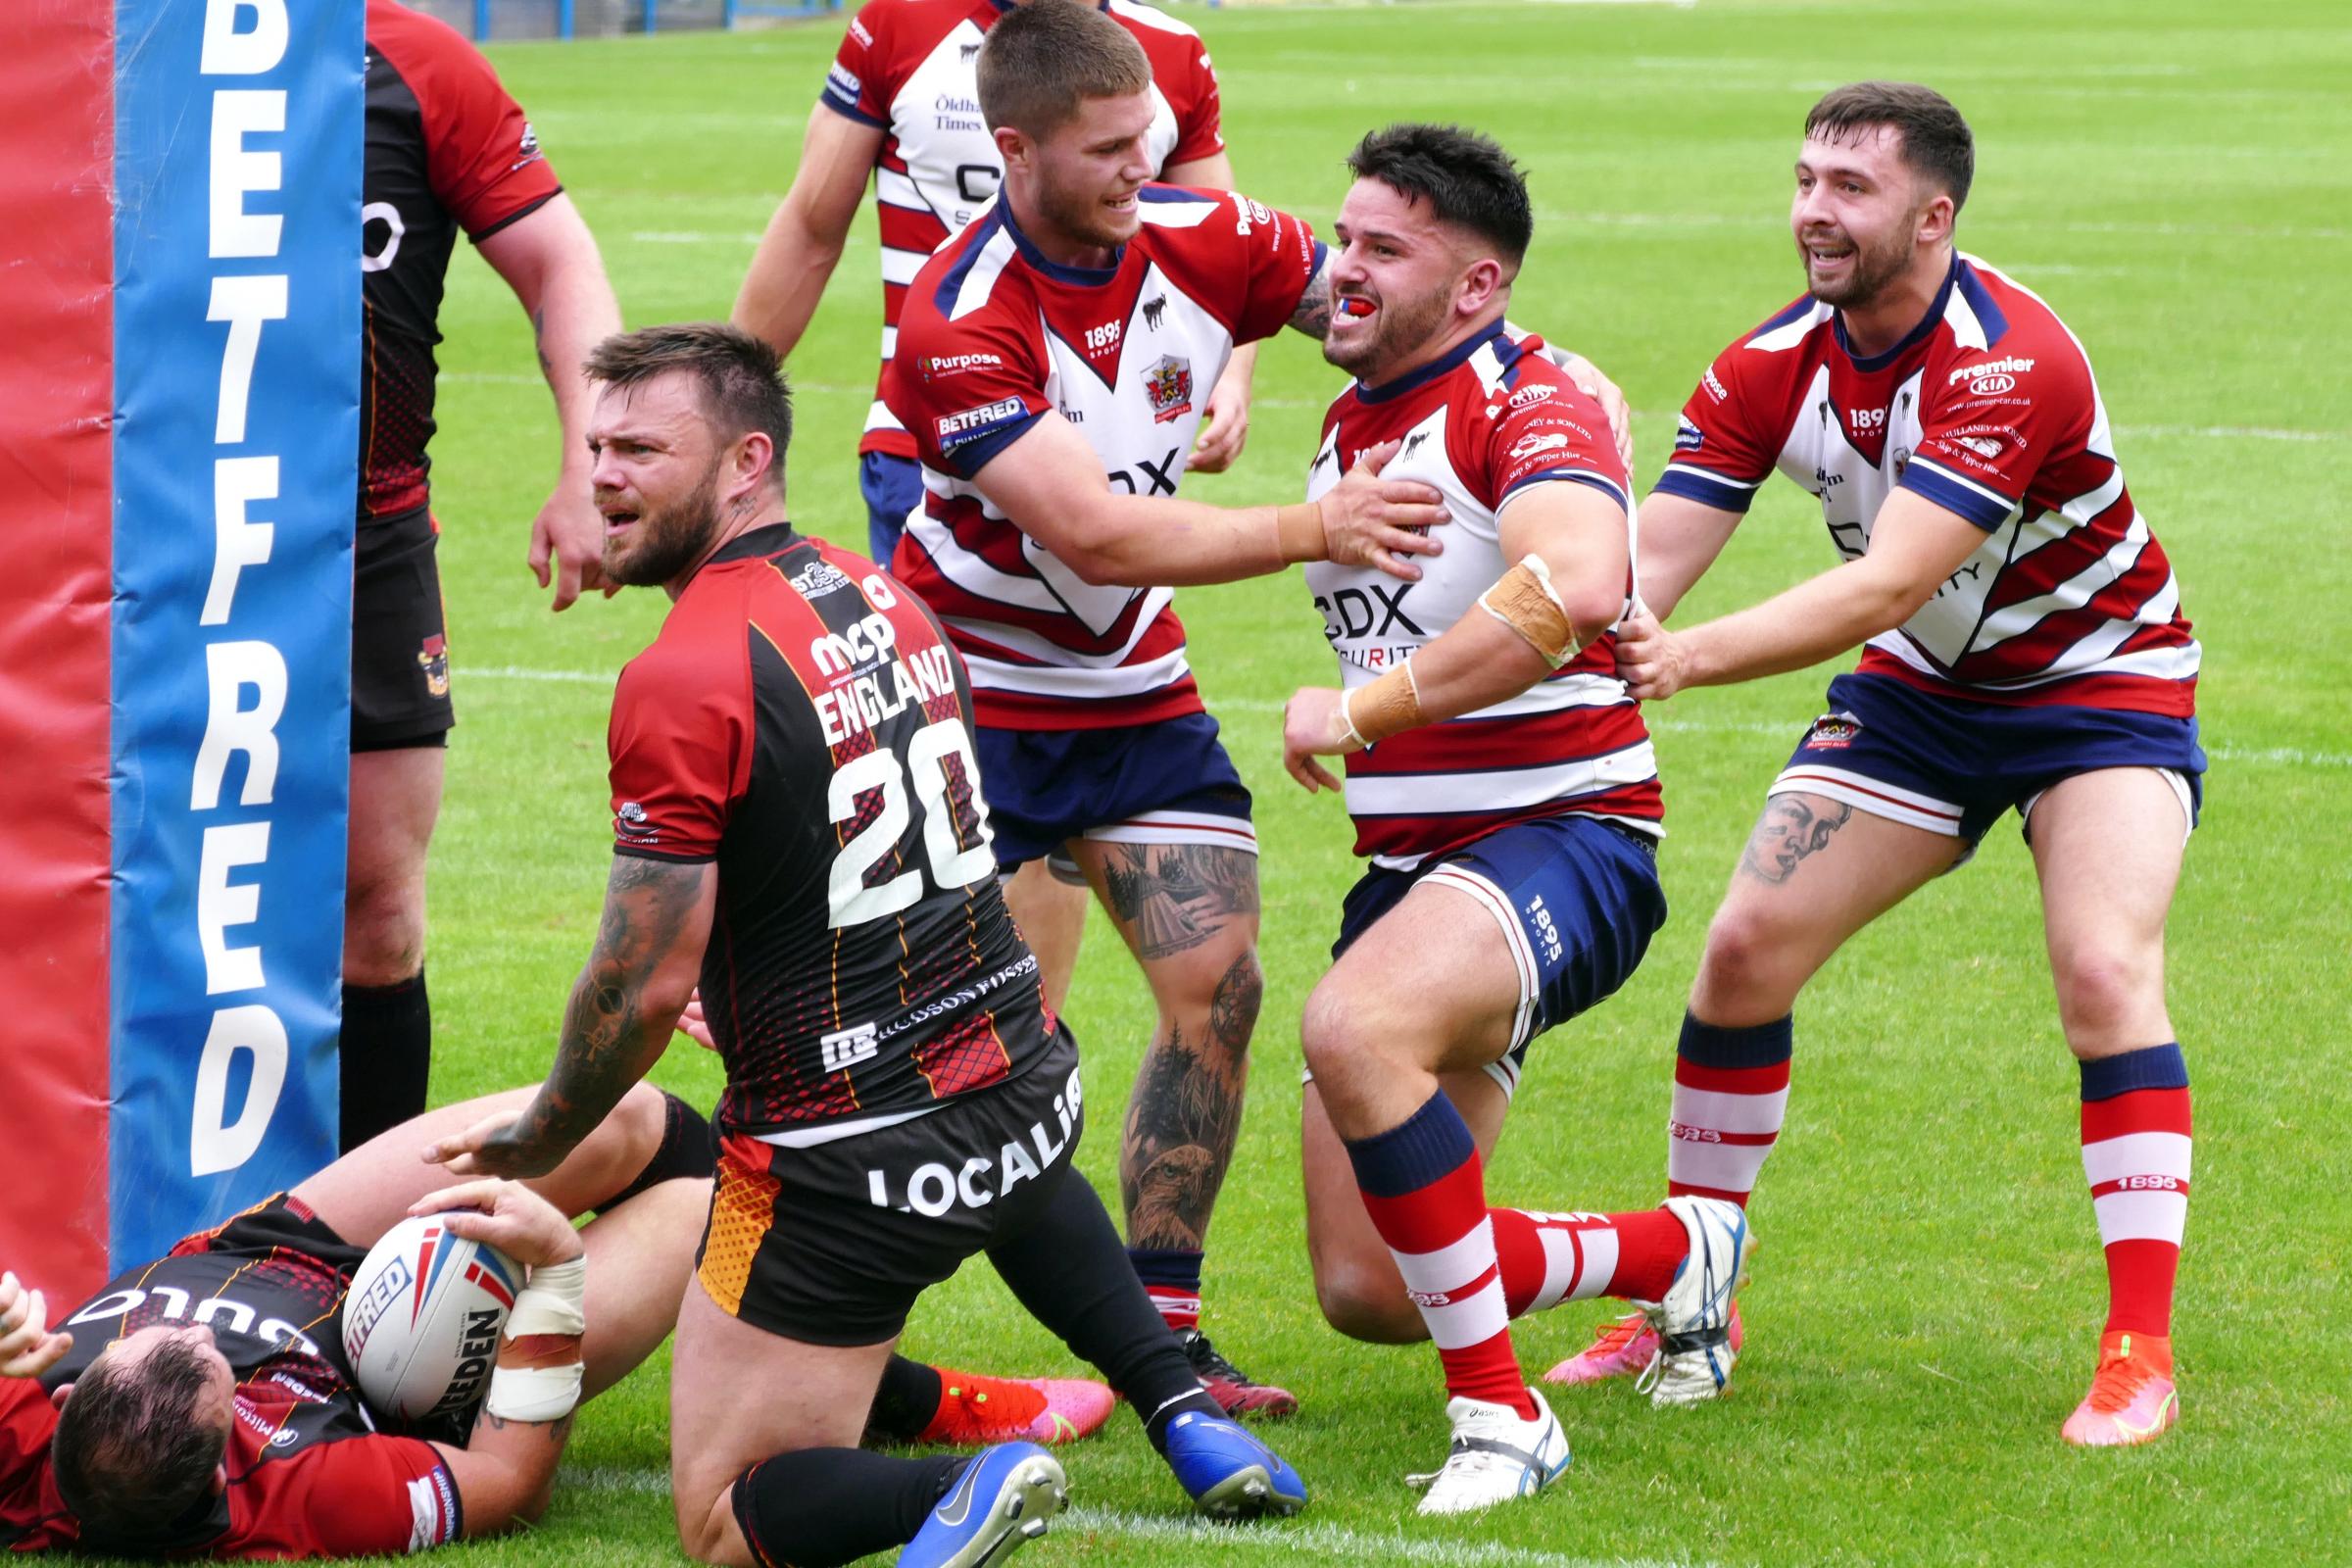 Martyn Reilly is congratulated by teammates after scoring his try